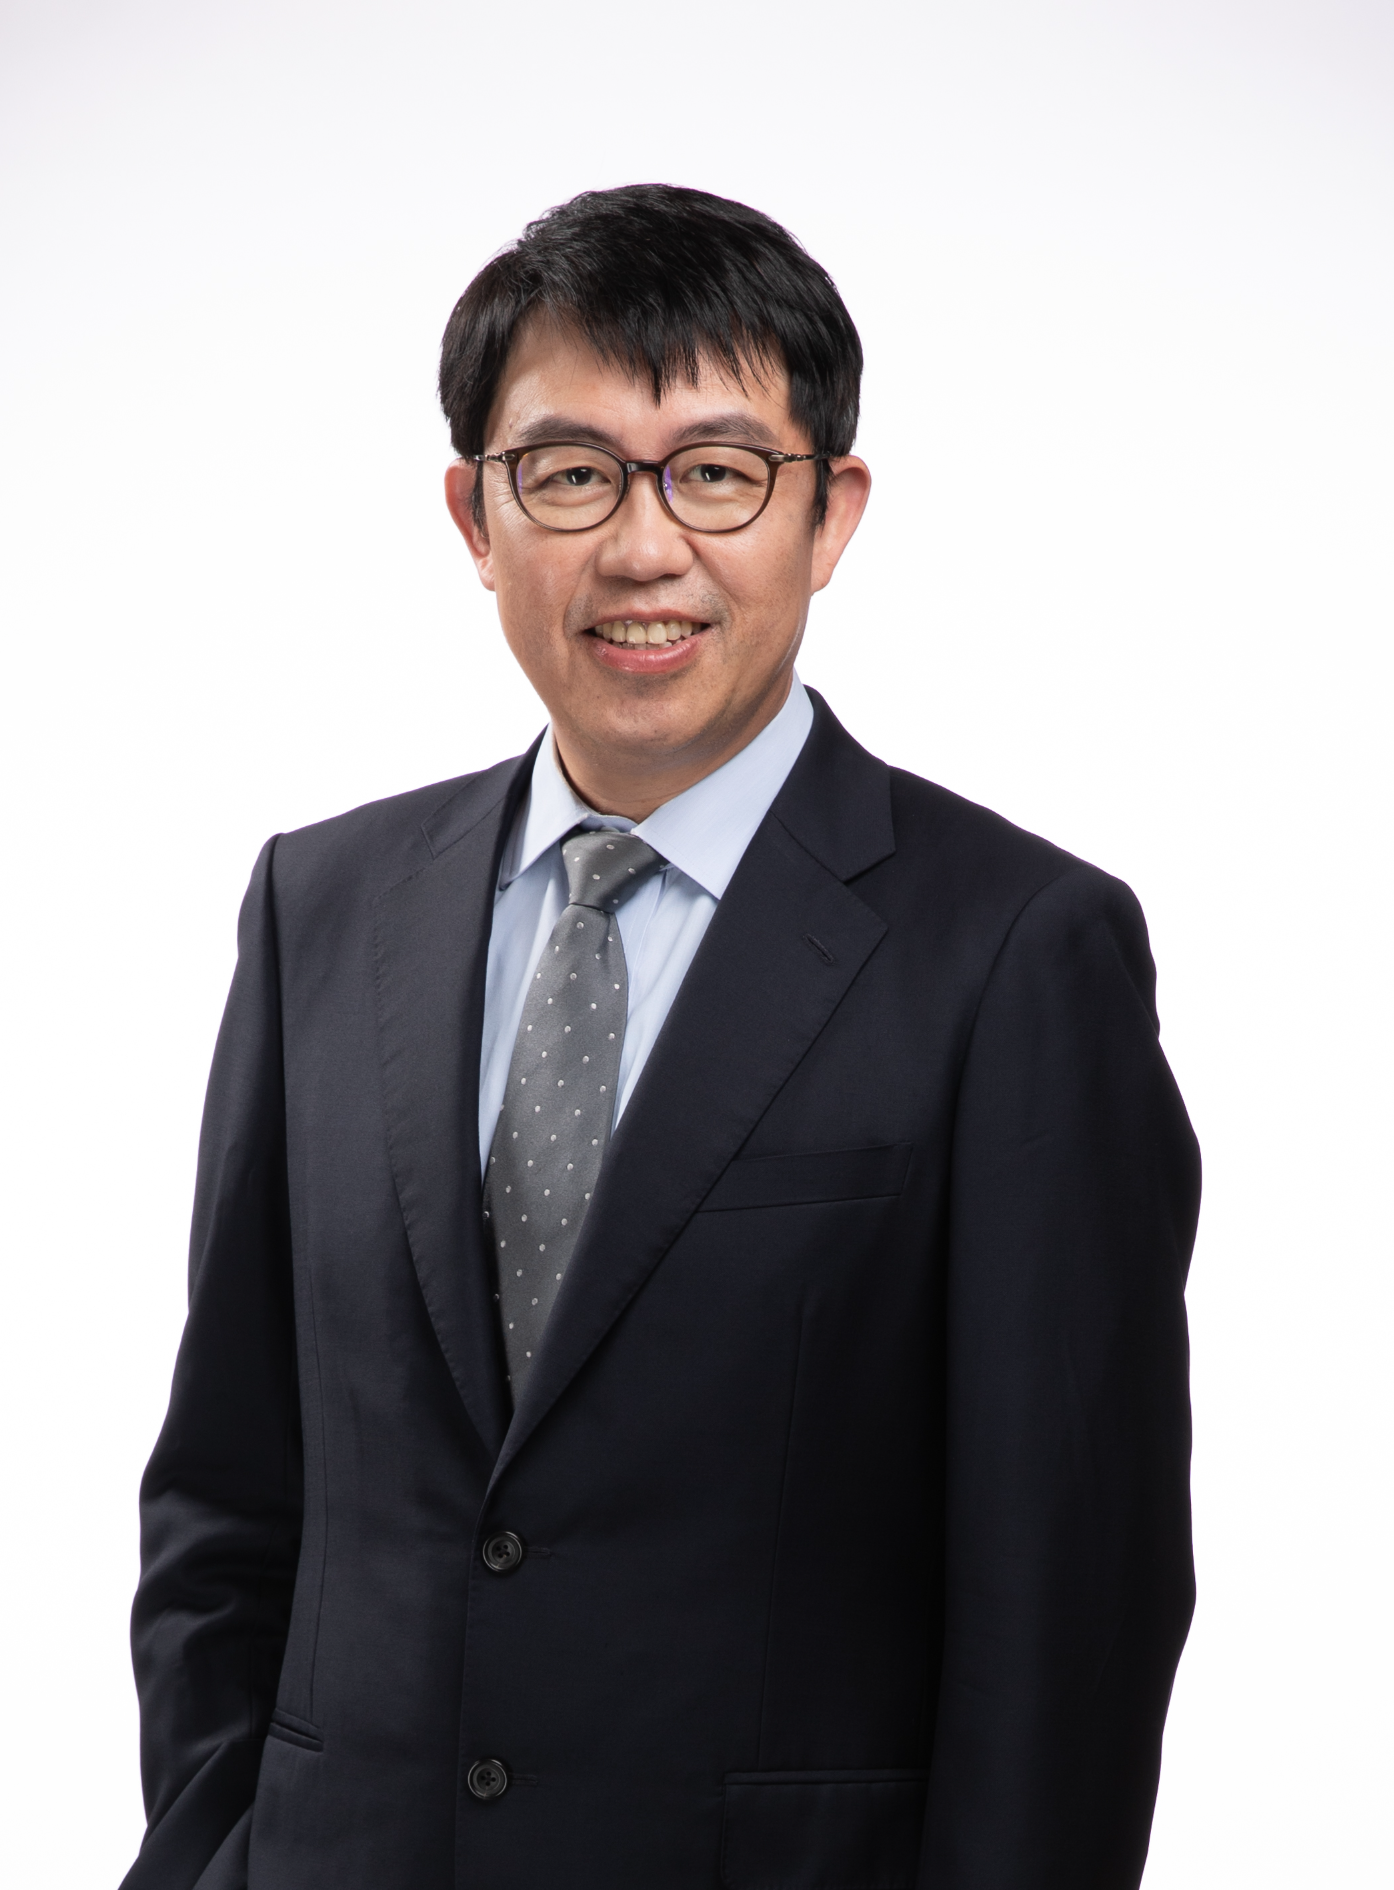 The Hospital Authority announced today (September 22) that Dr Chung Kin-lai will be appointed as the Cluster Chief Executive of New Territories East and Hospital Chief Executive of Prince of Wales Hospital with effect from December 15, 2022.